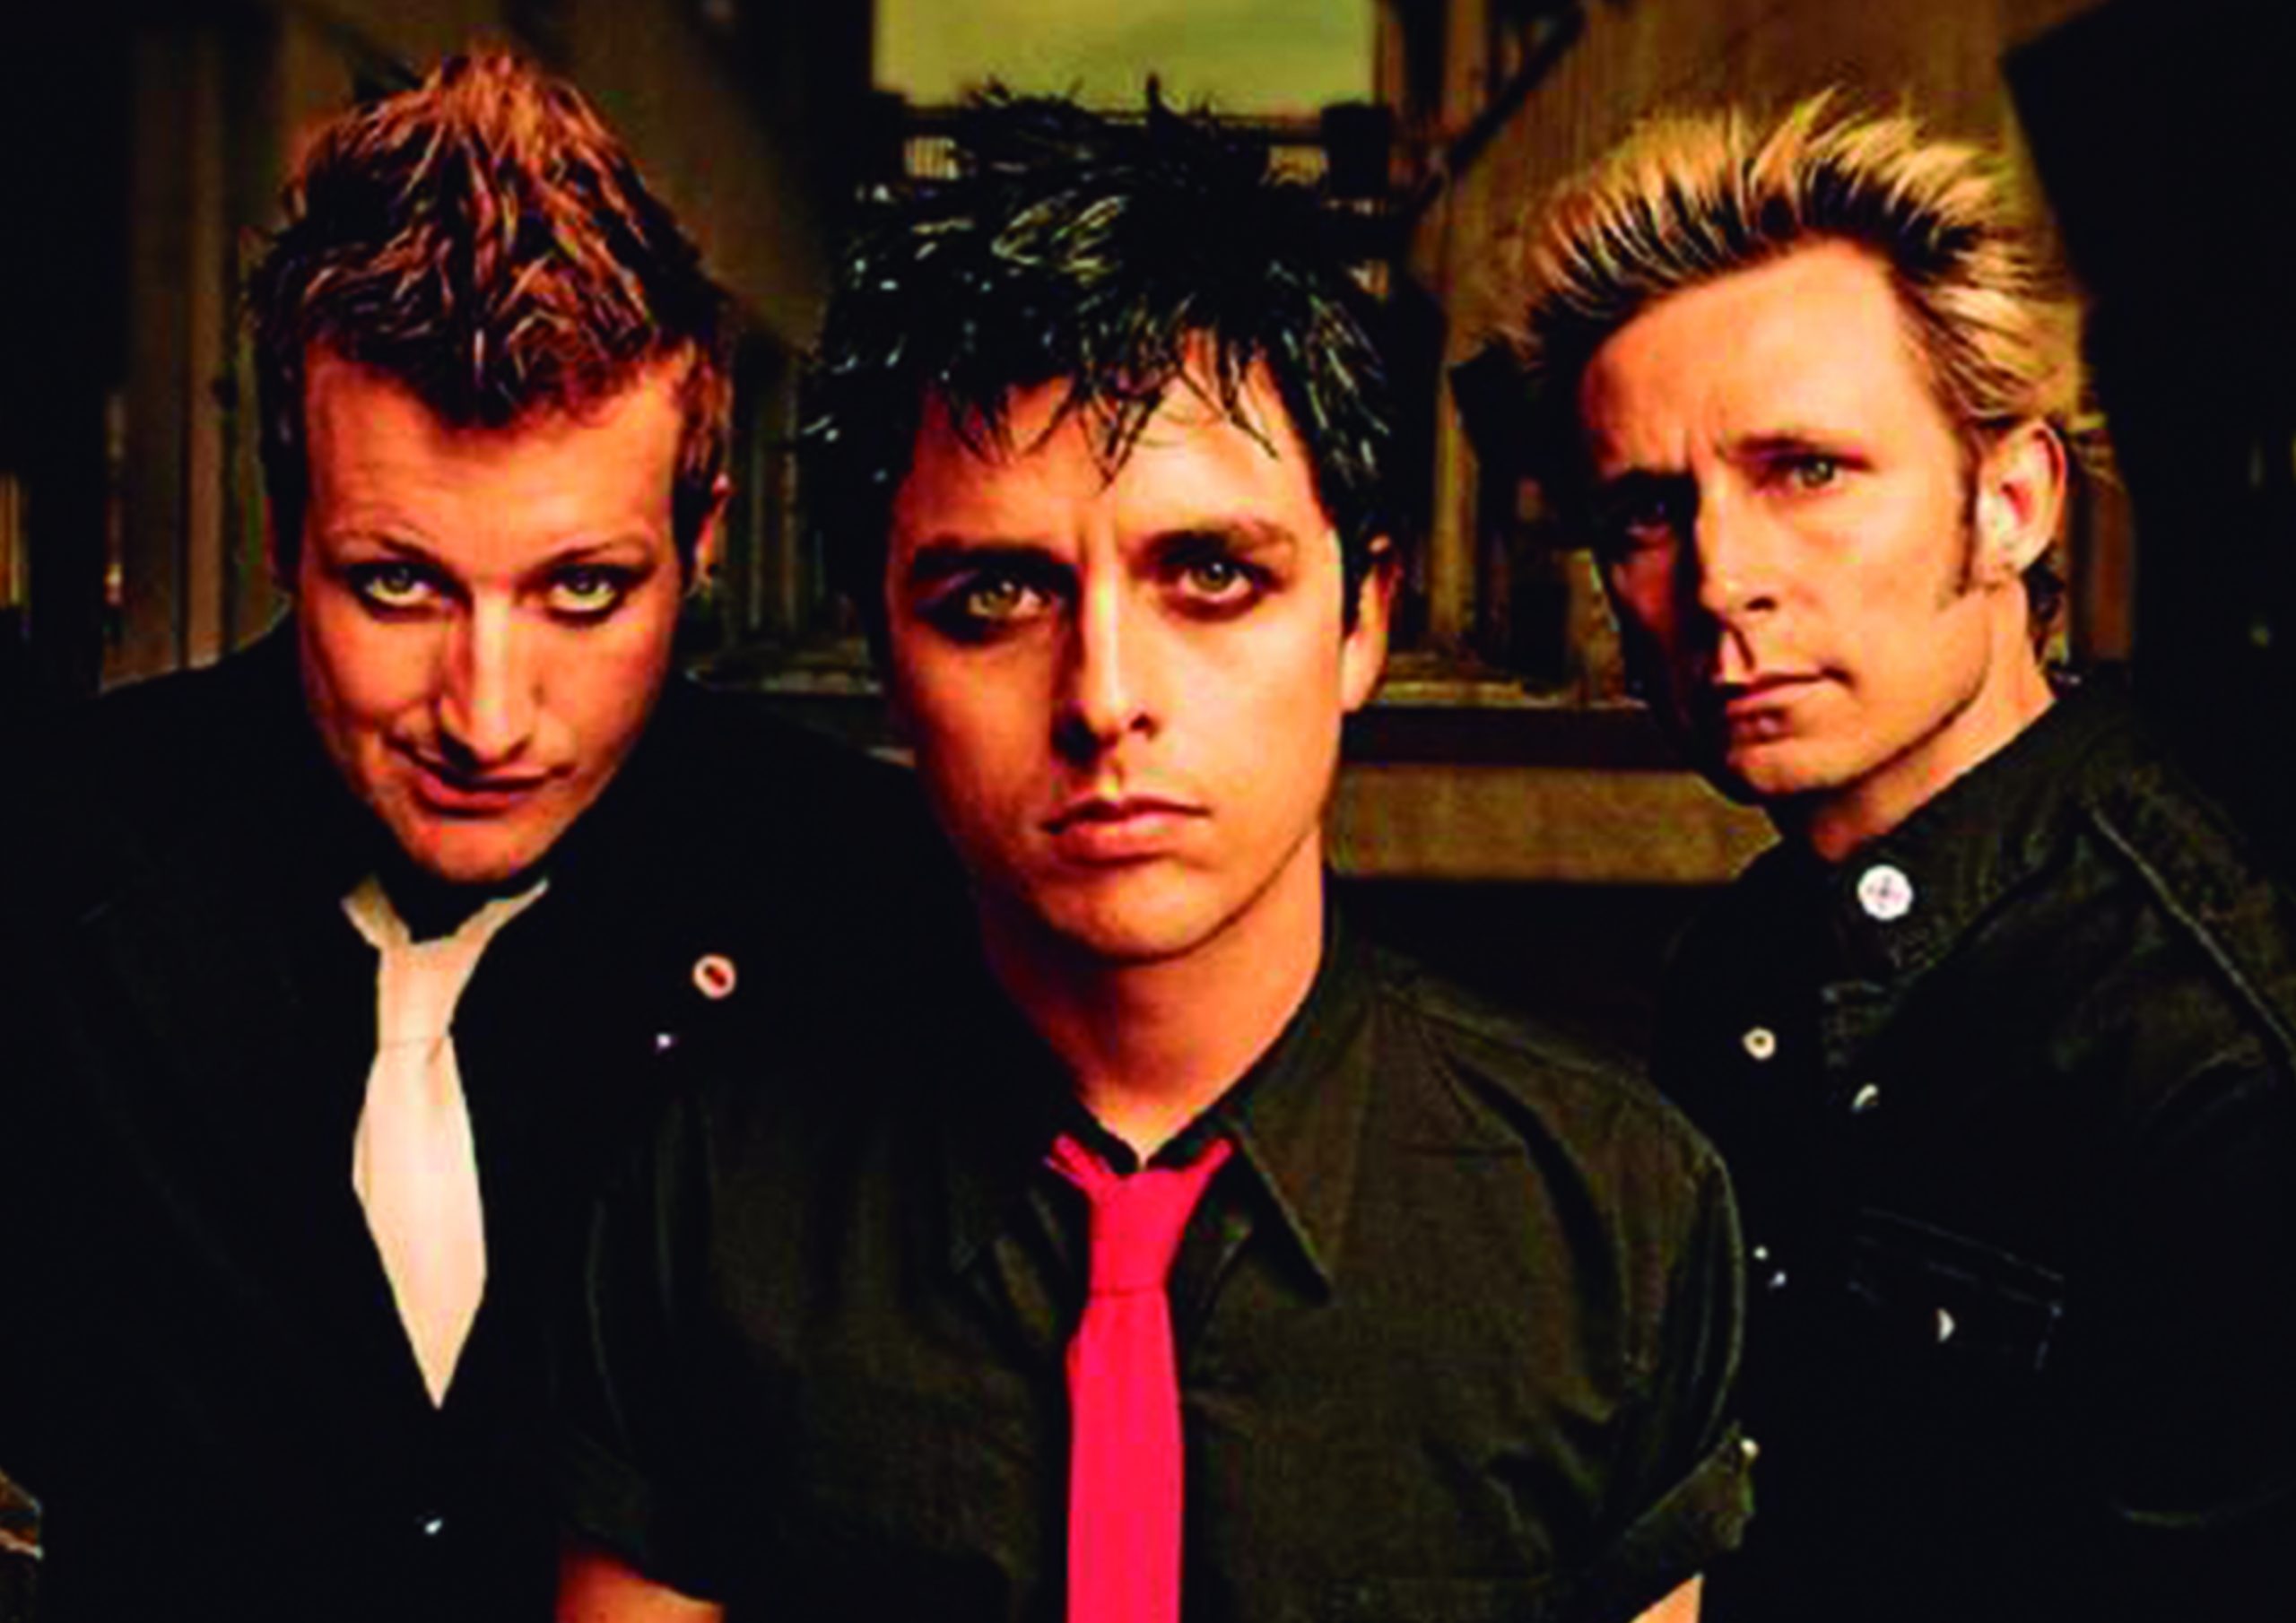 Relive Pop-Punk 2000s groups like Green Day